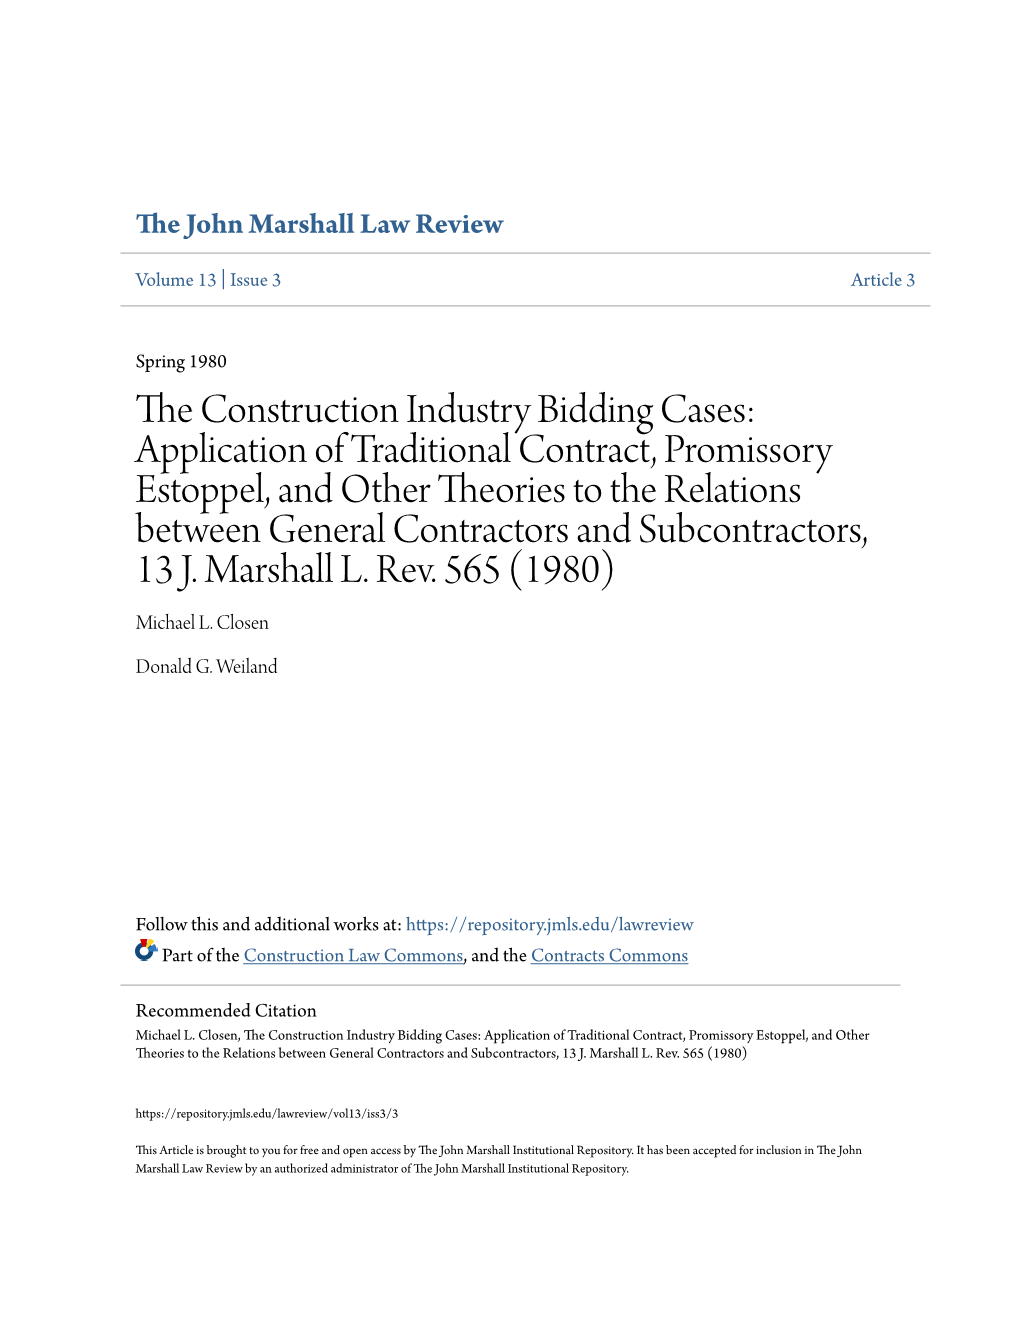 The Construction Industry Bidding Cases